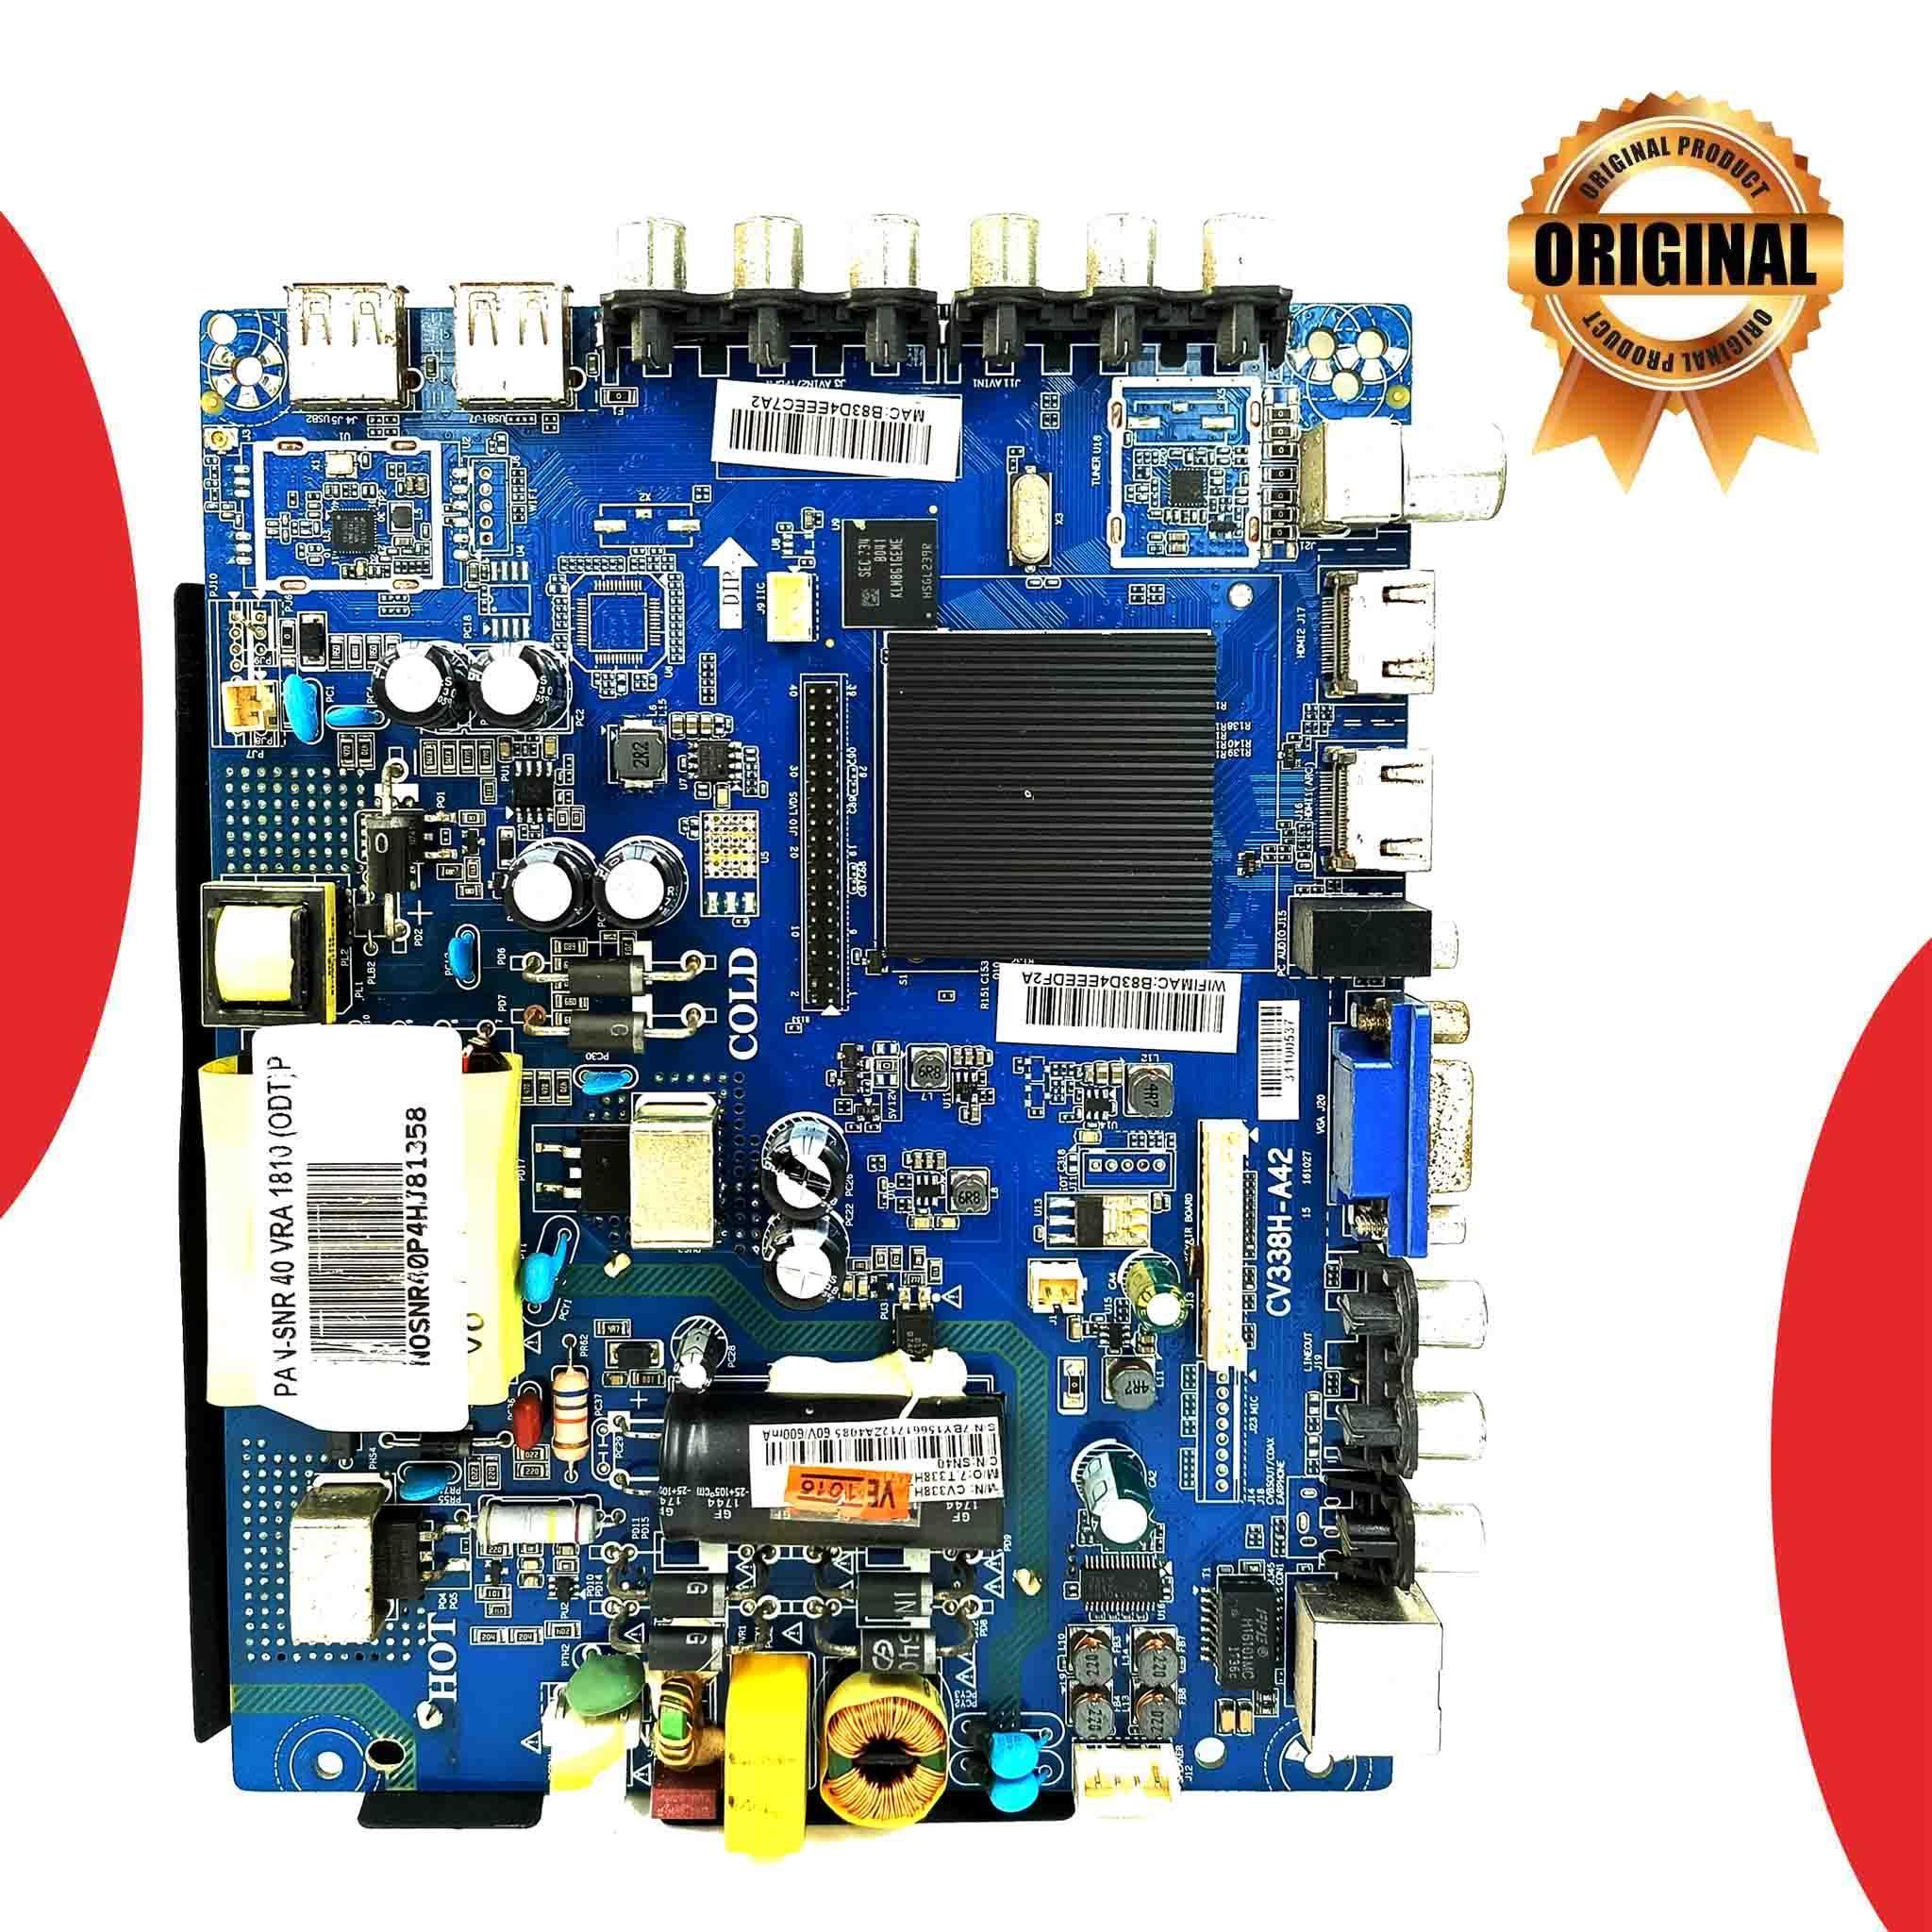 Croma 39 inch LED TV Motherboard for Model CRTEL7341 - Great Bharat Electronics